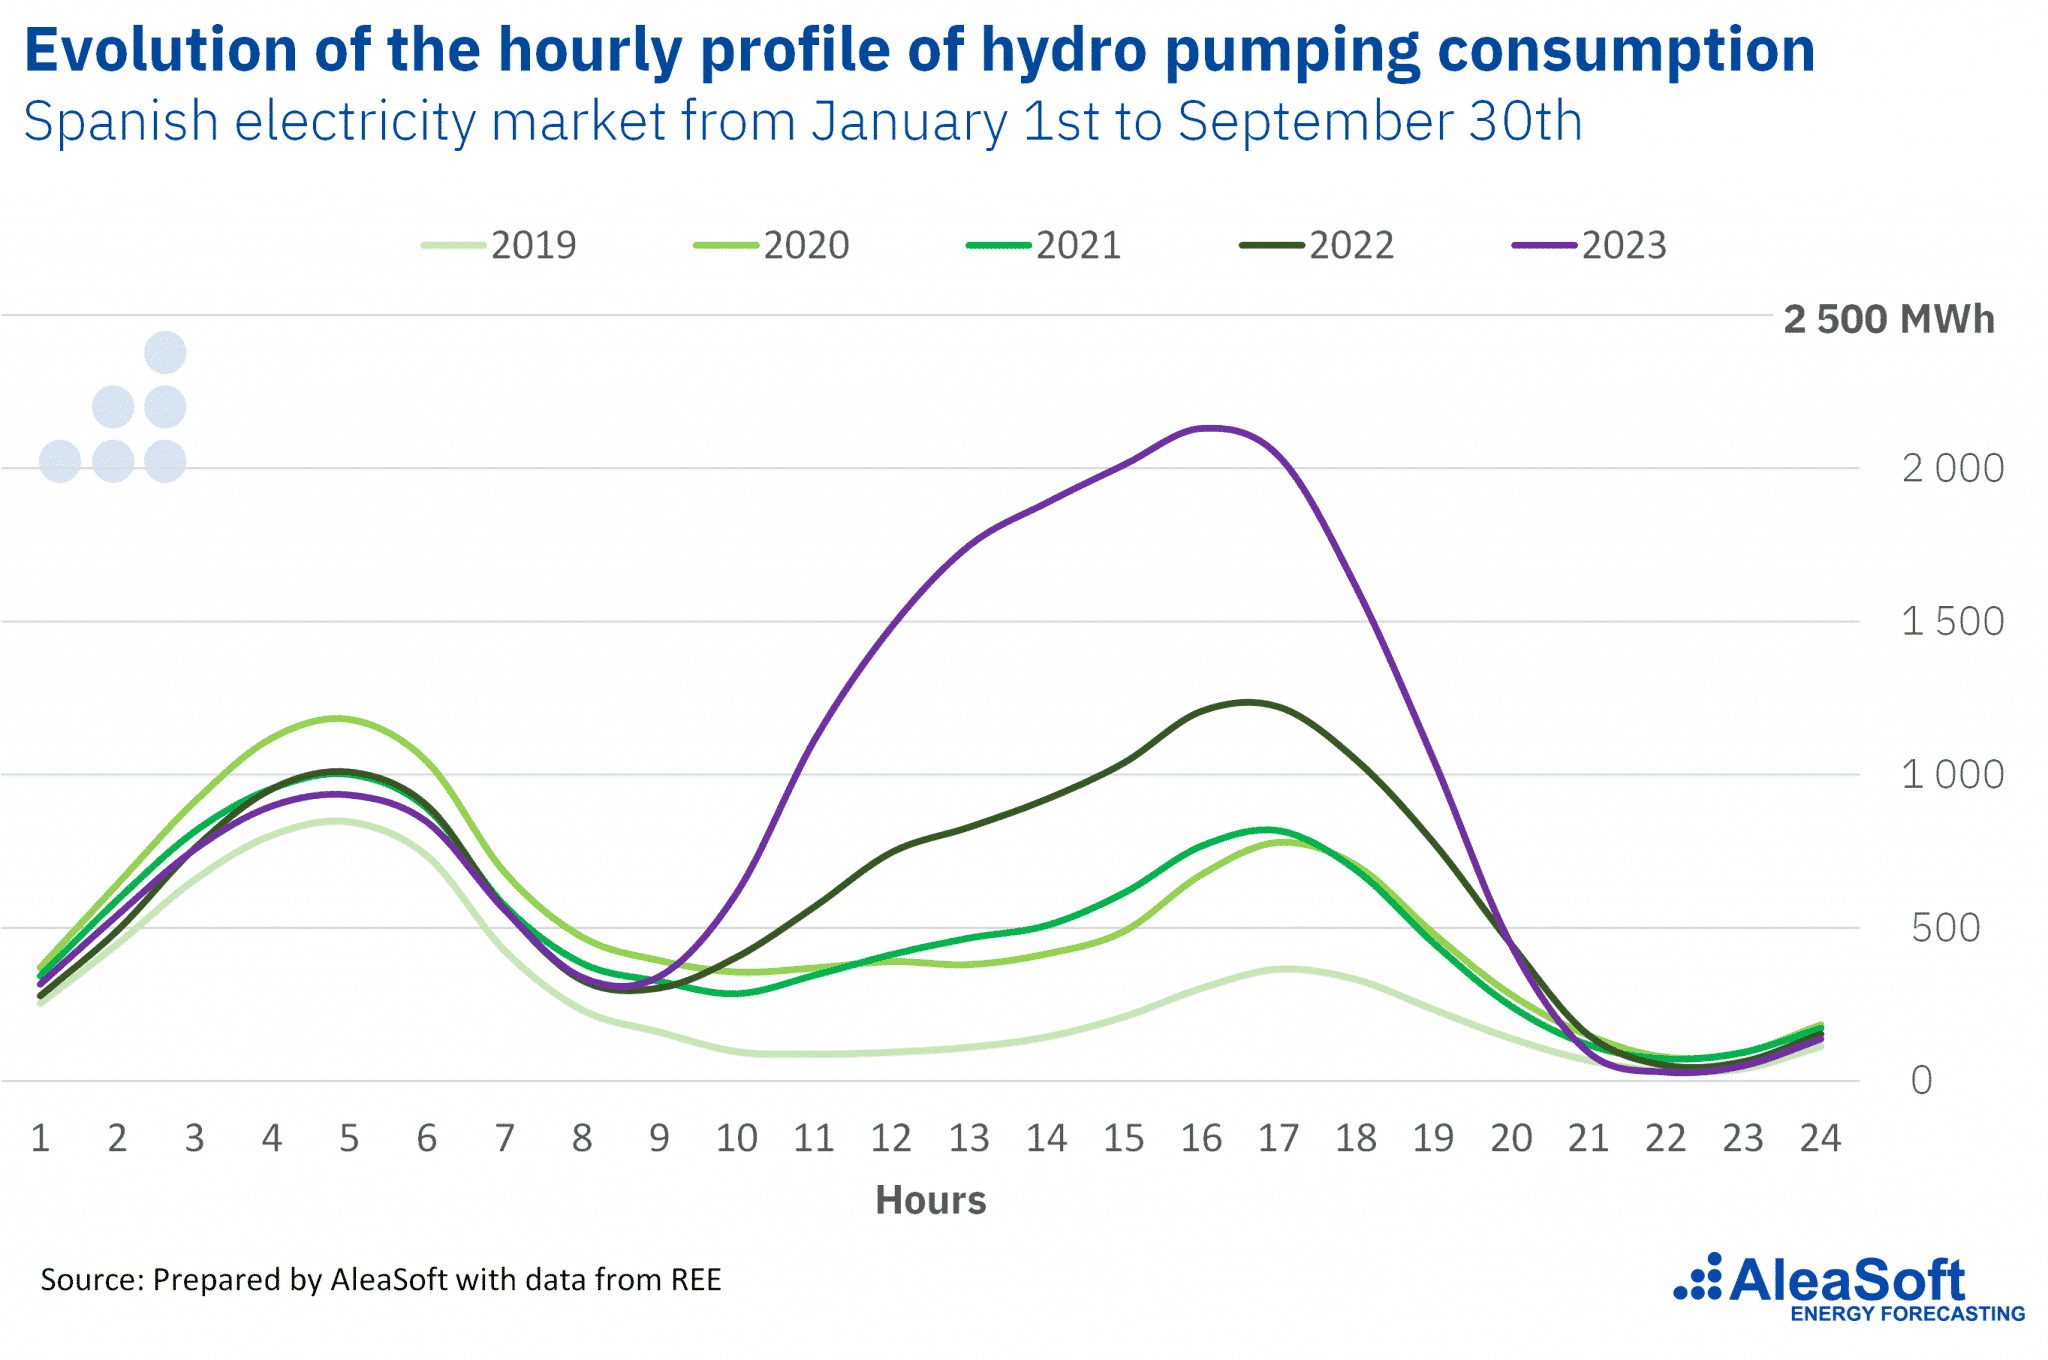 AleaSoft - hydro pumping consumption hourly profile